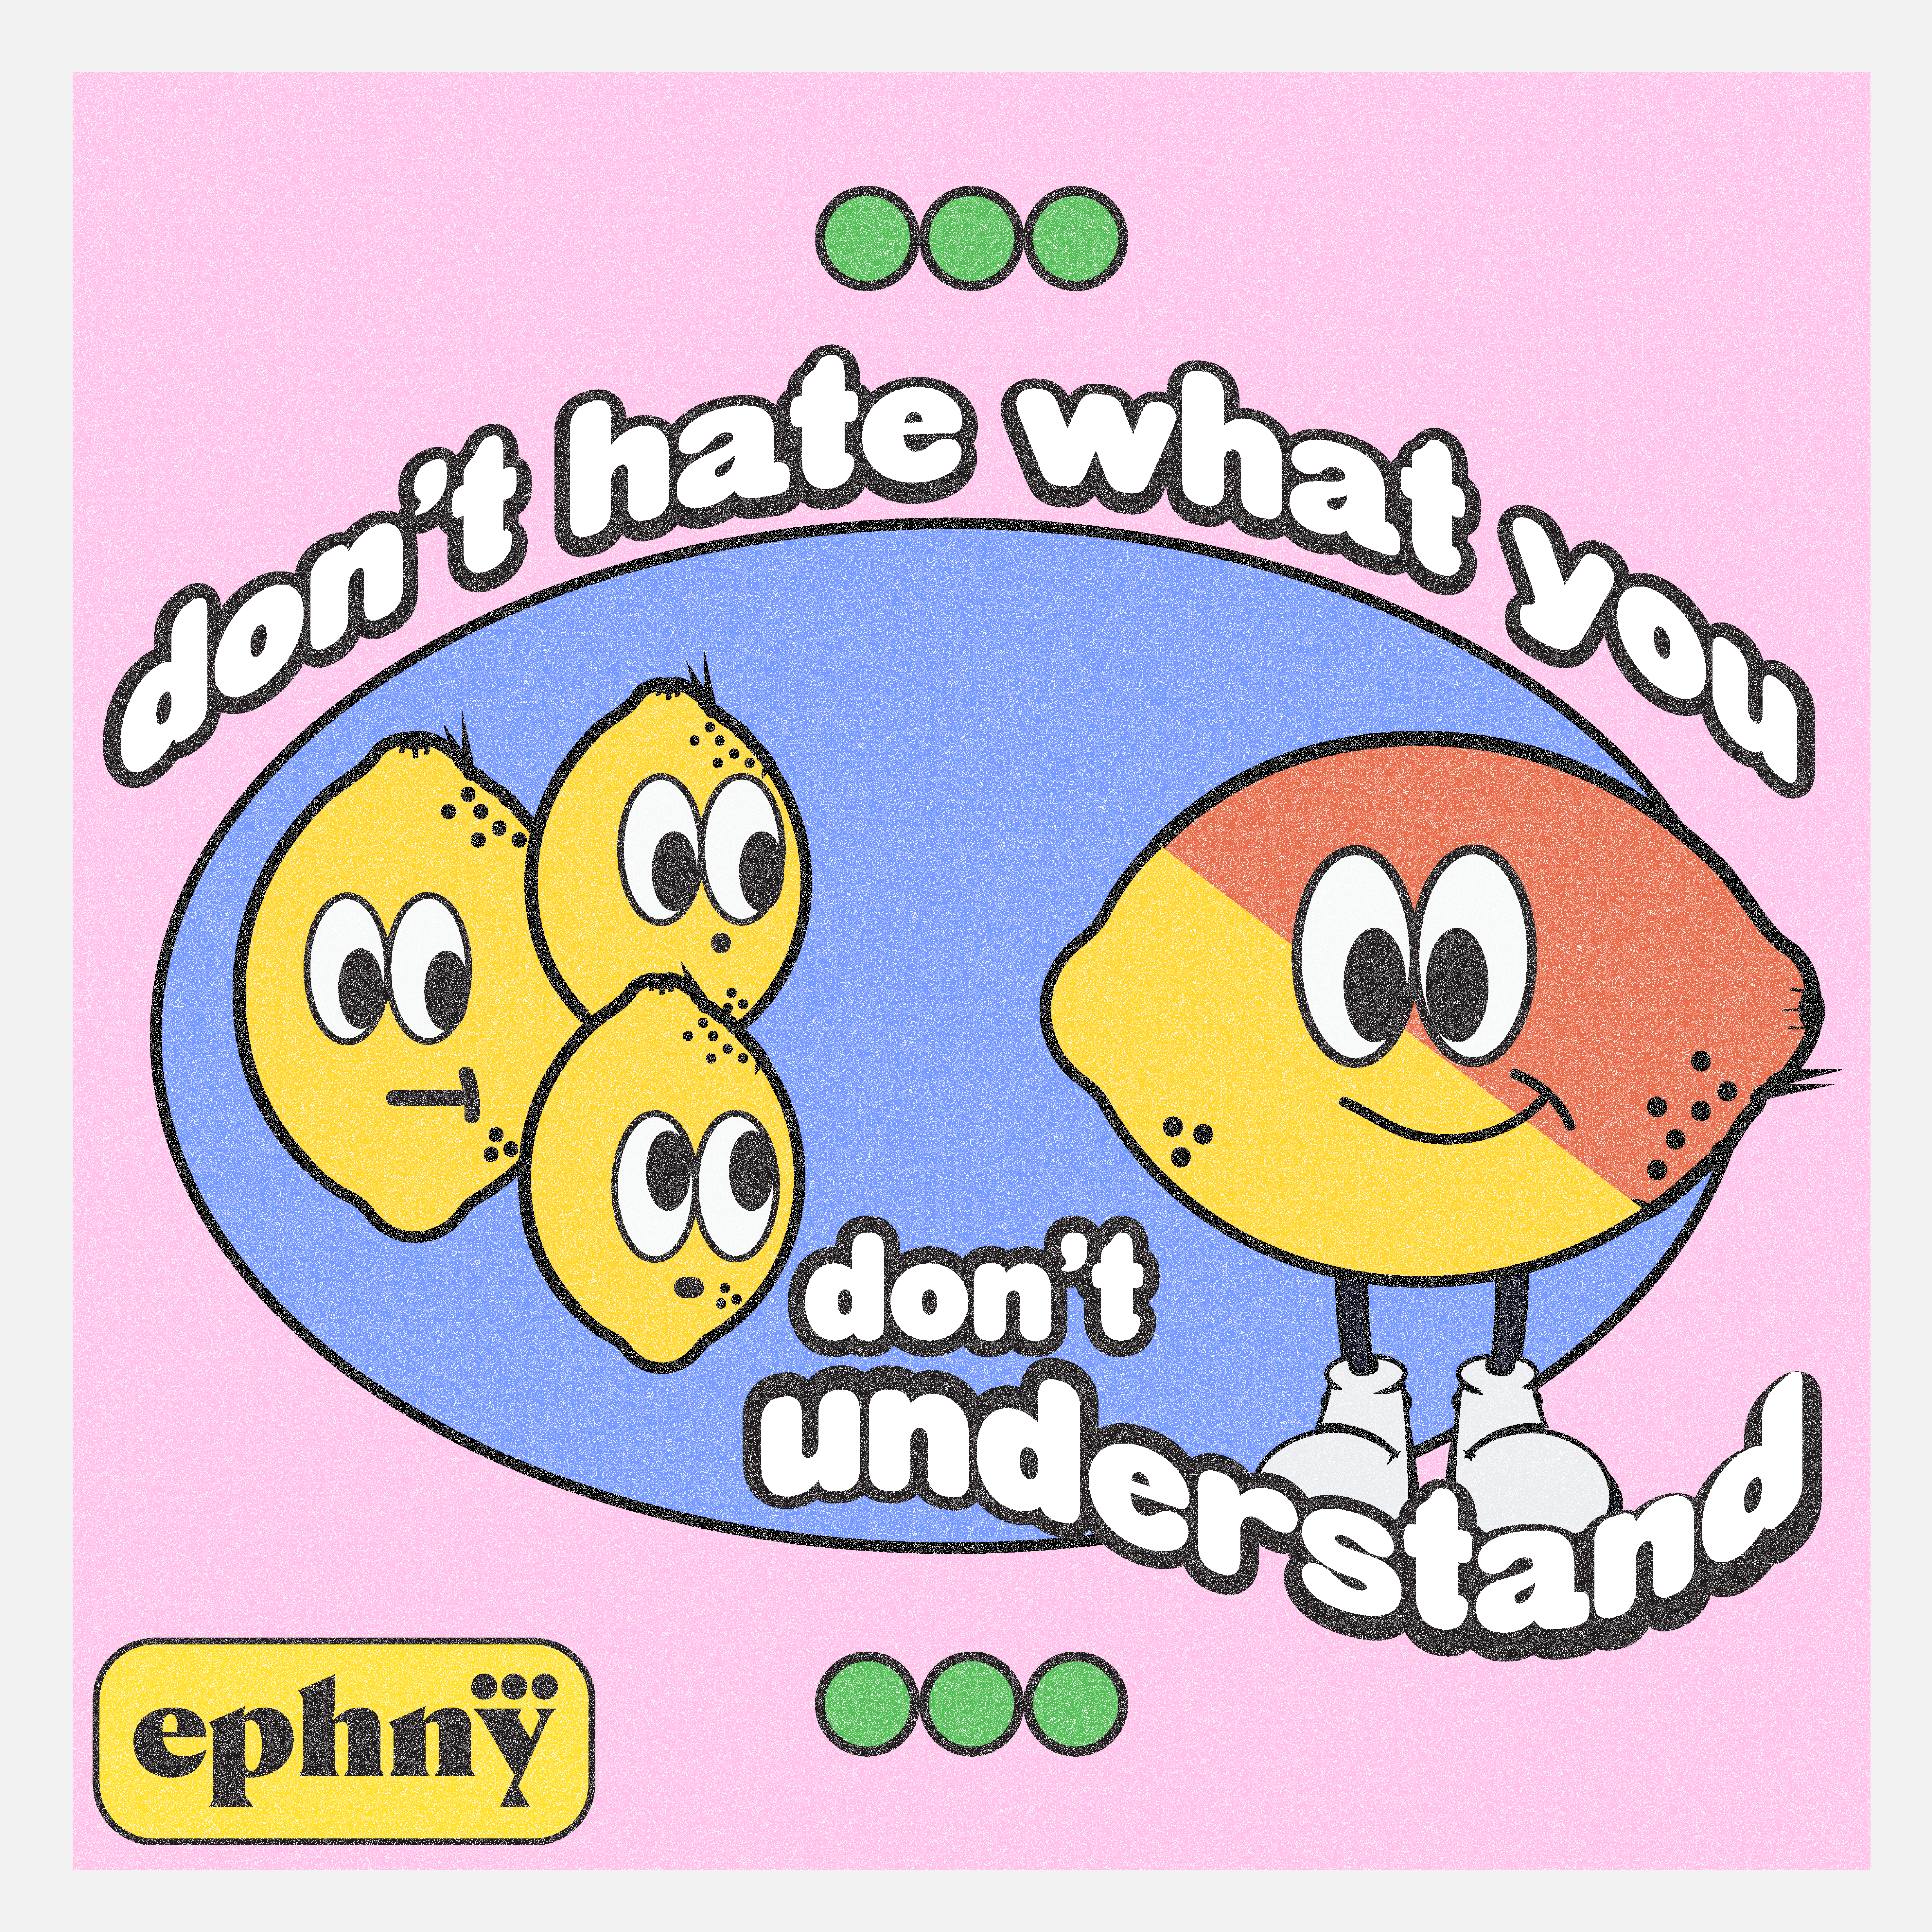 don't hate what you don't understand image